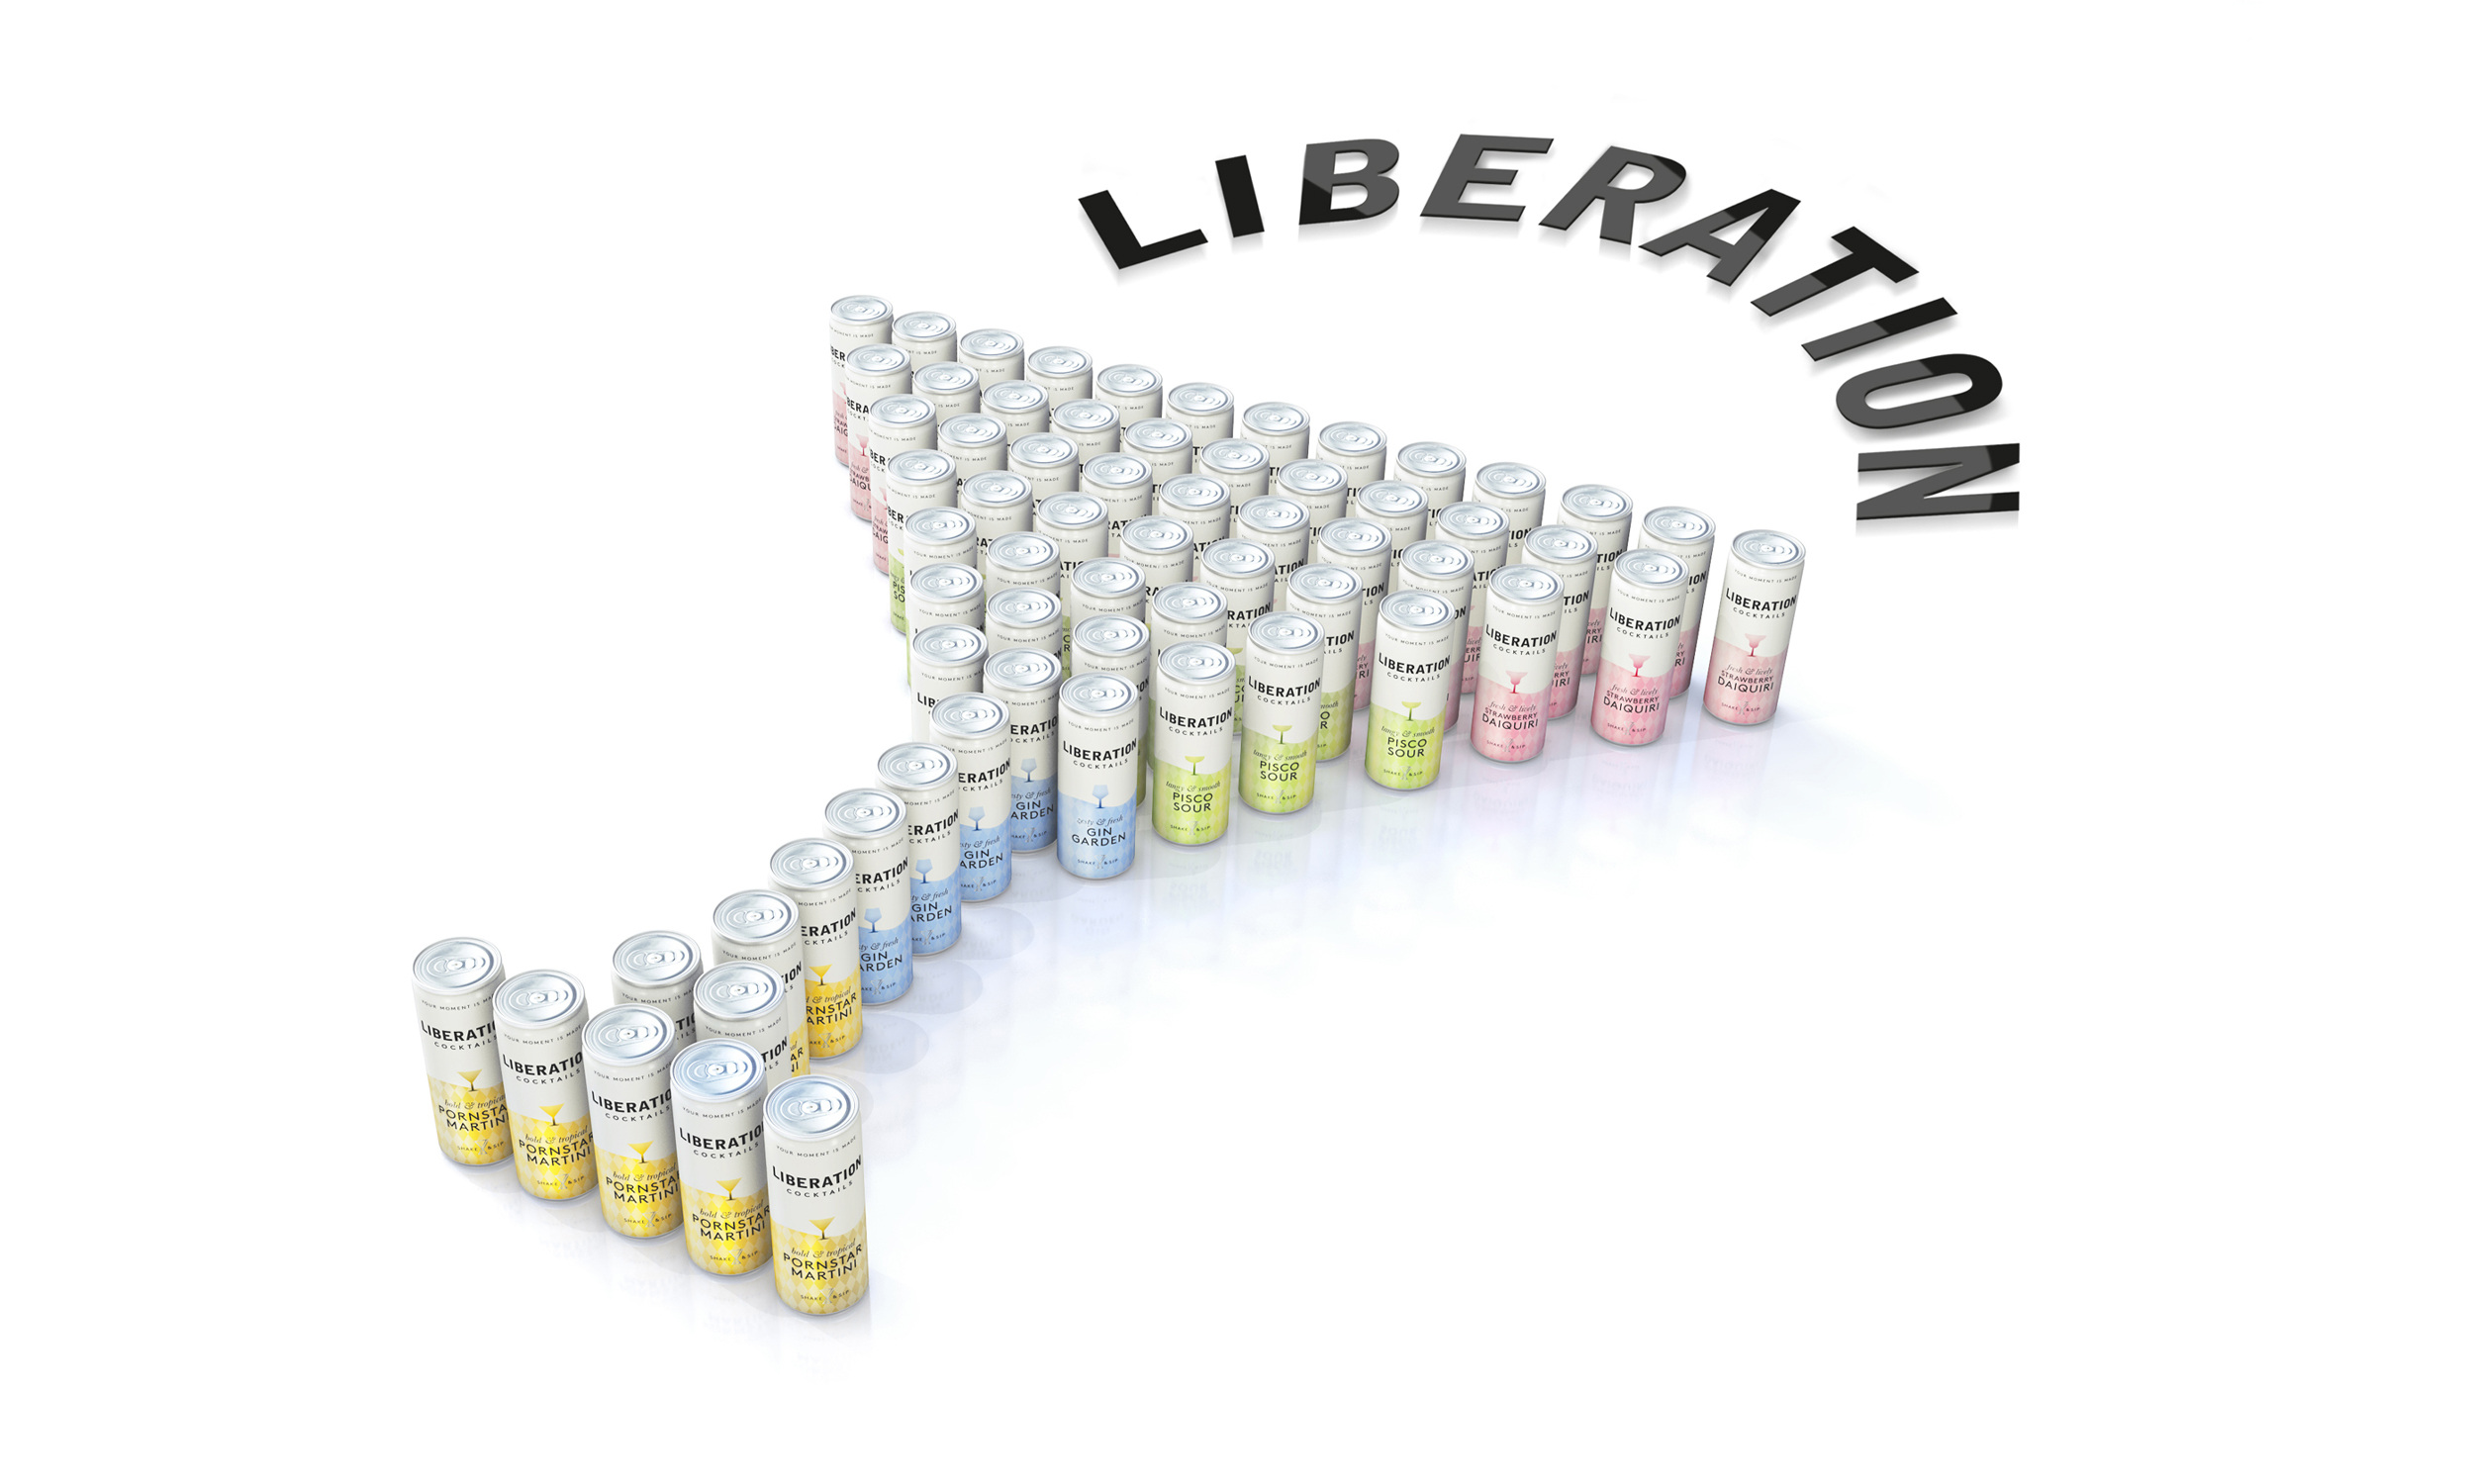 Liberation Cocktails Rebranded by Popp Studio